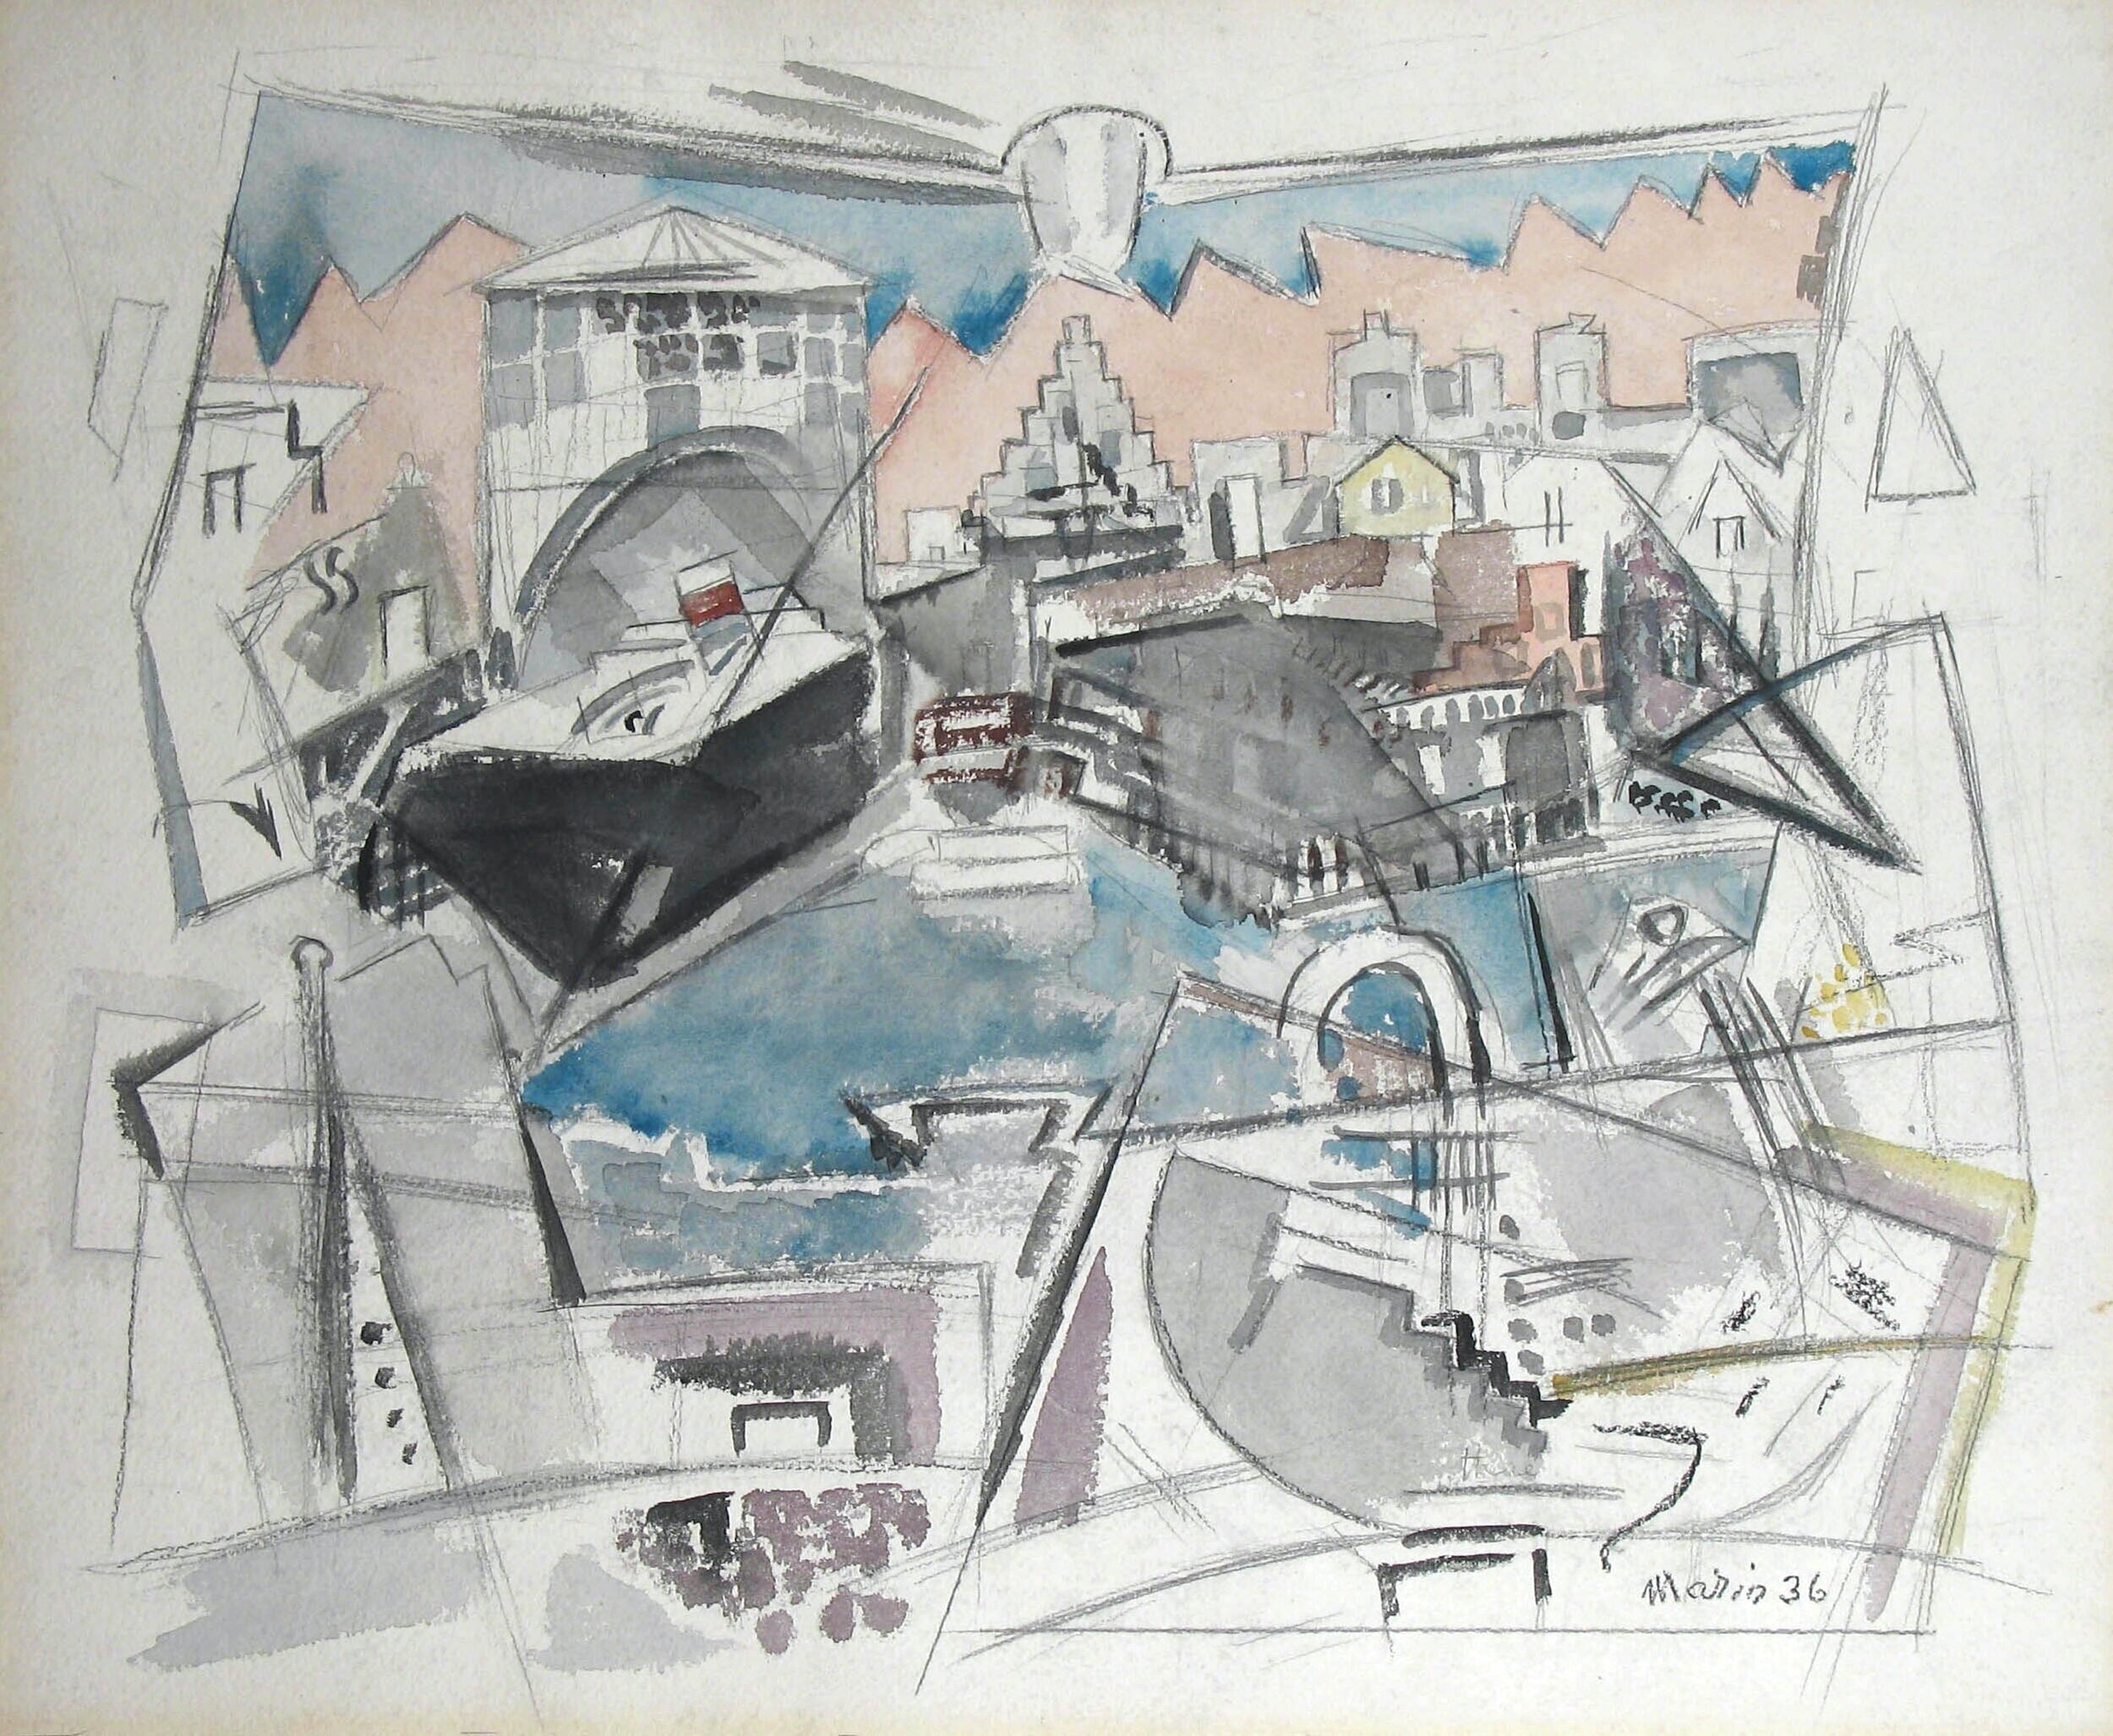 Abstract watercolor in blue, grey, and pink of Manhattan waterfront with buildings and ship